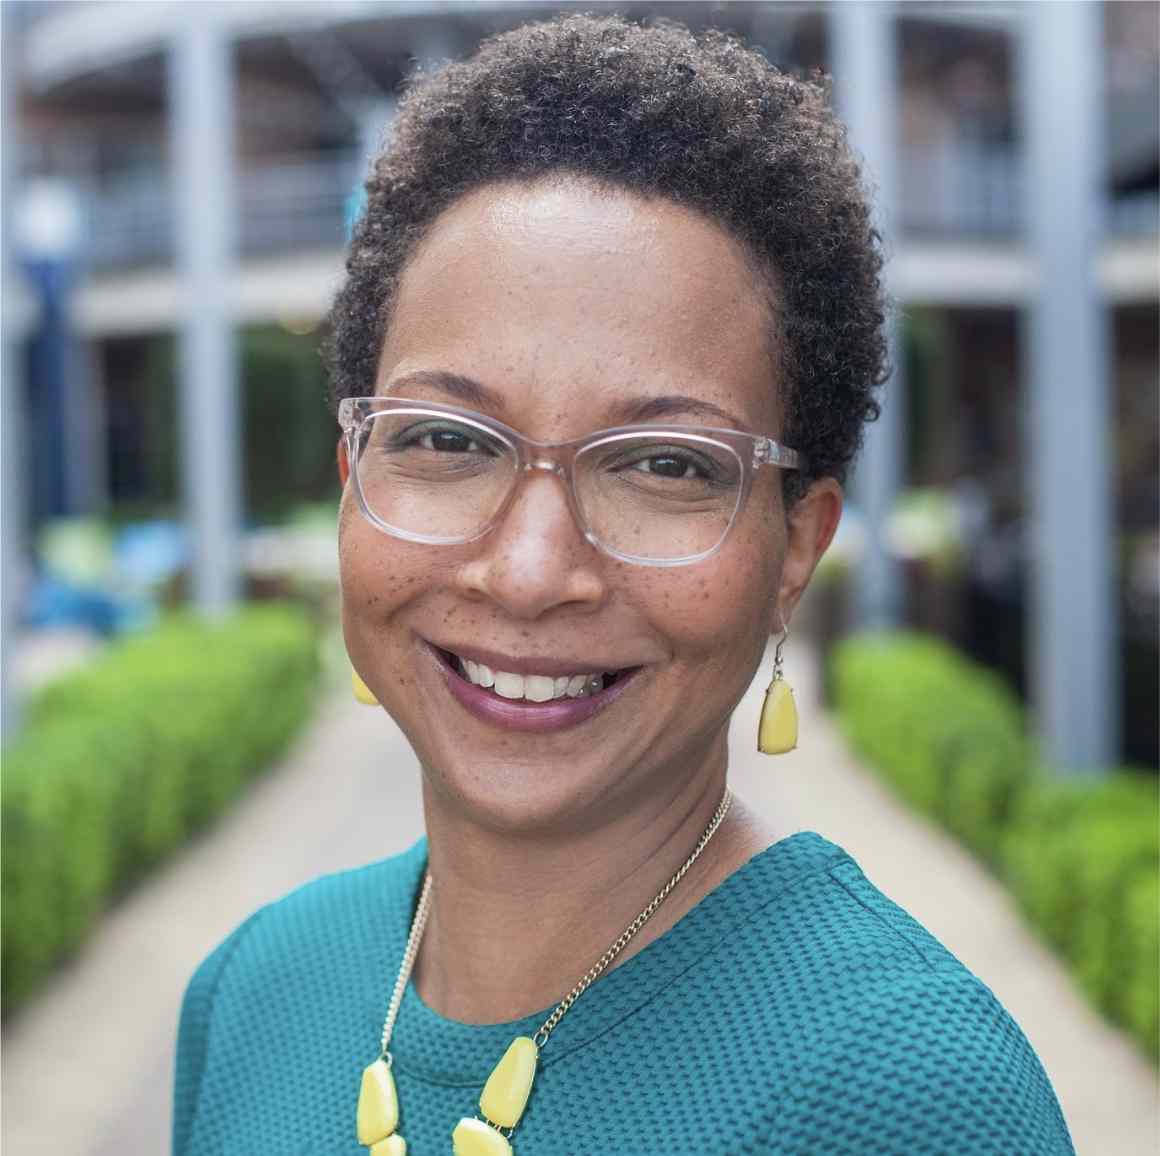 Outdoor professional headshot of Dr. Michele Williams. She is a Black woman pictured with short natural hair and clear rimmed eyeglasses.